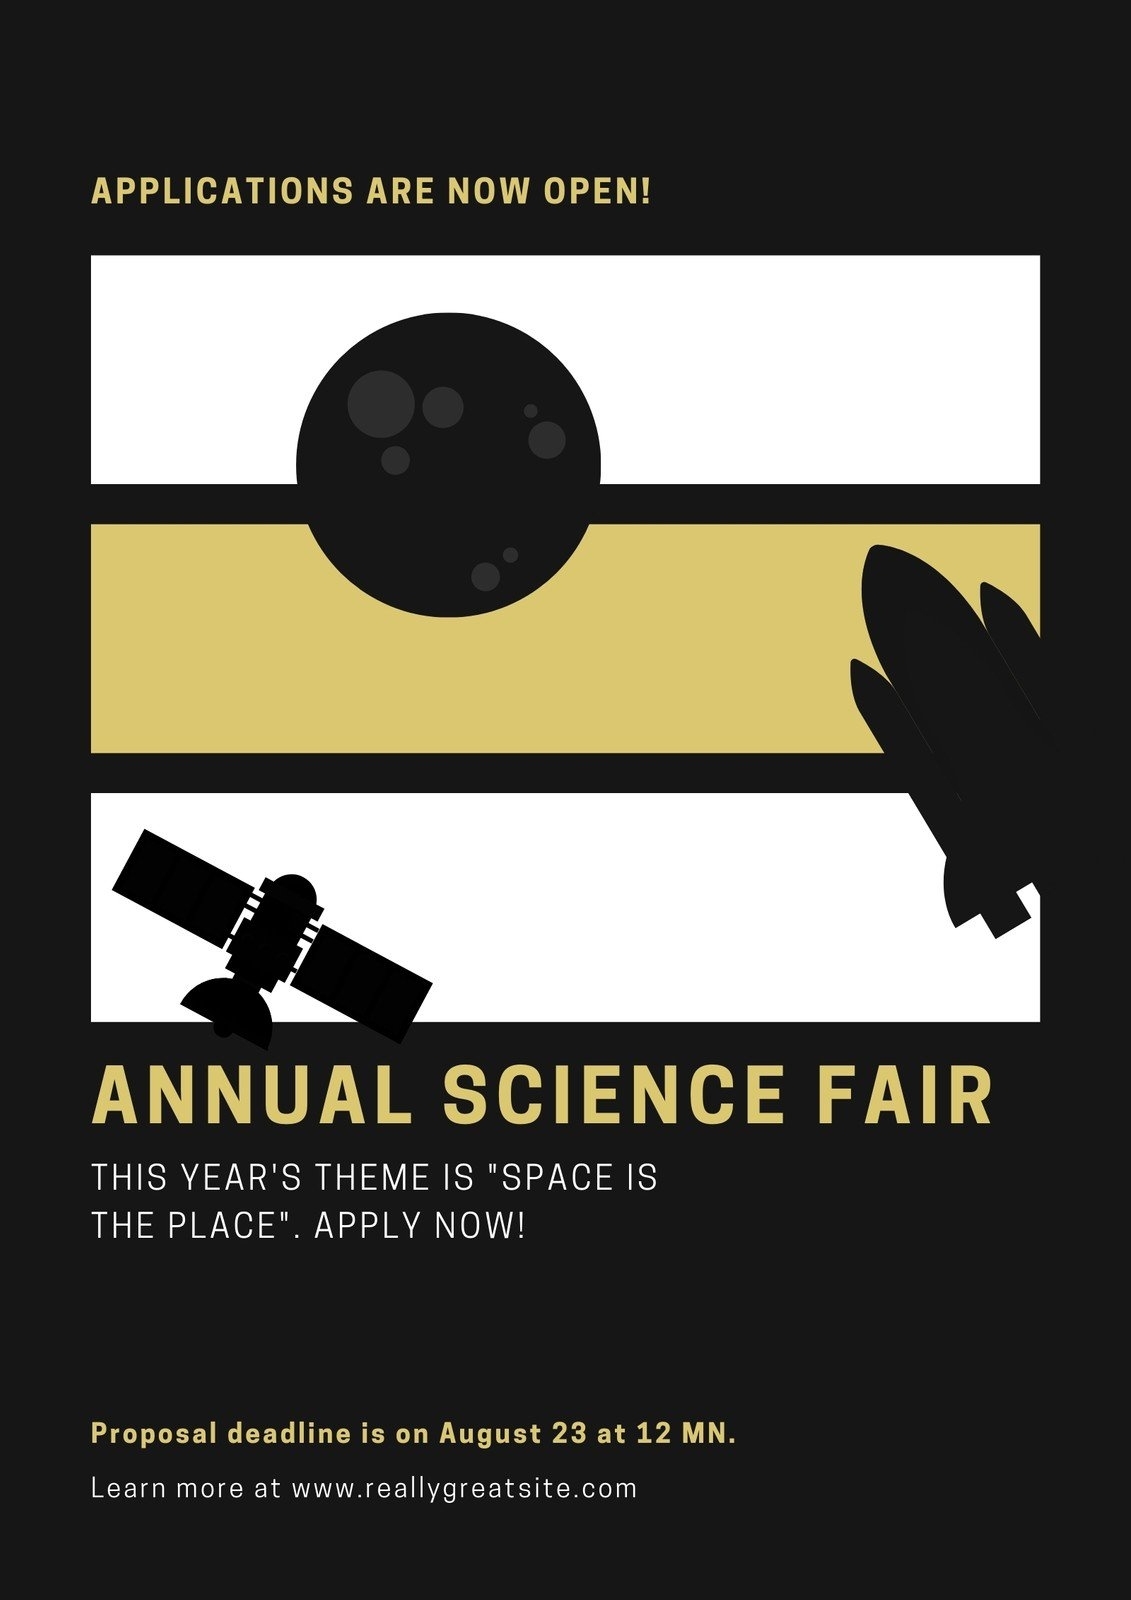 Free Printable, Customizable Science Fair Poster Templates | Canva For Science Fair Banner Template